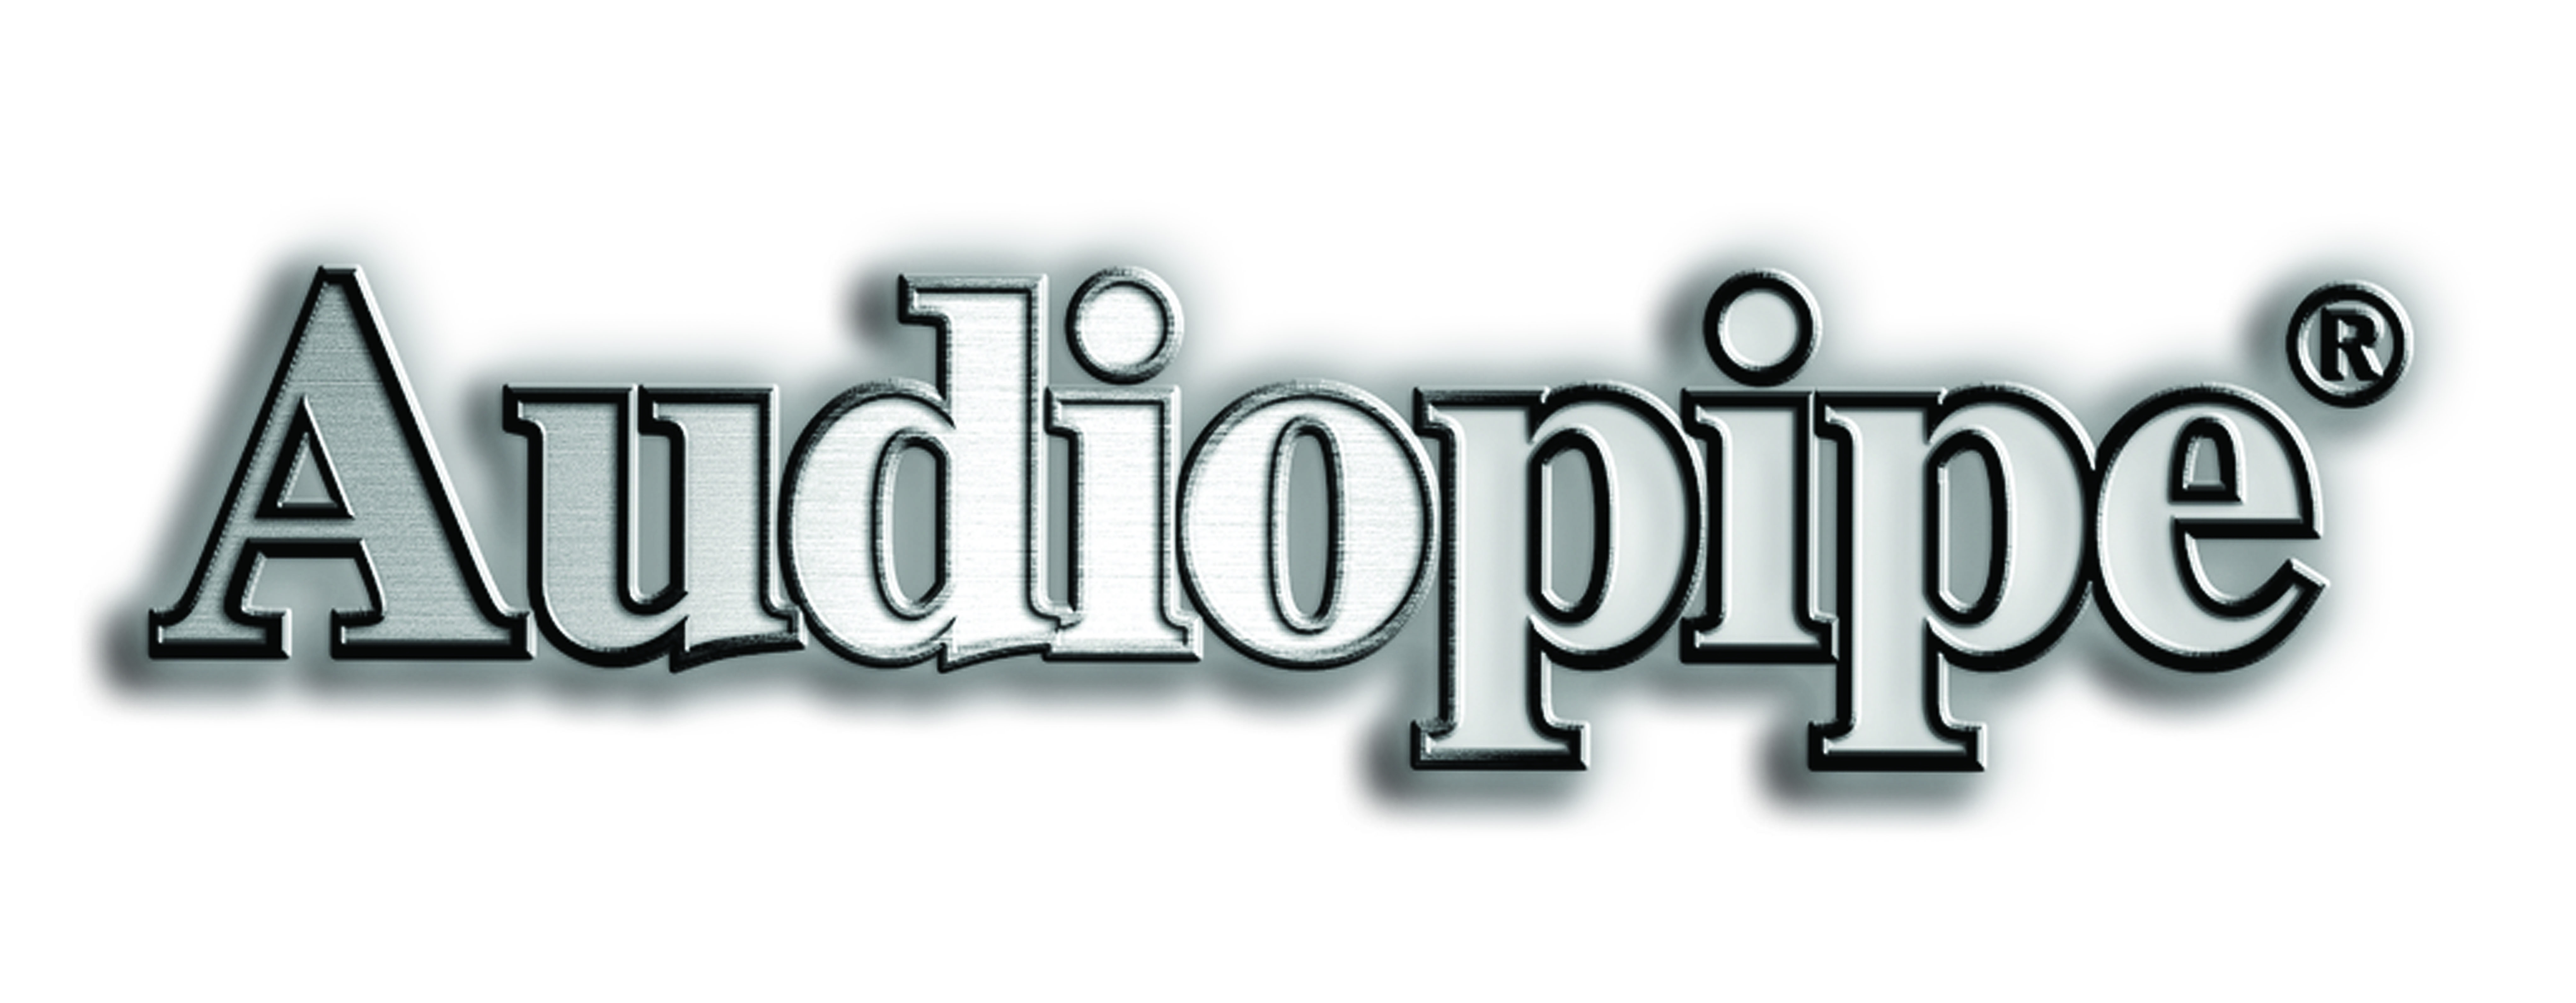 Audiopipe Png Hdpng.com 8173 - Audiopipe, Transparent background PNG HD thumbnail